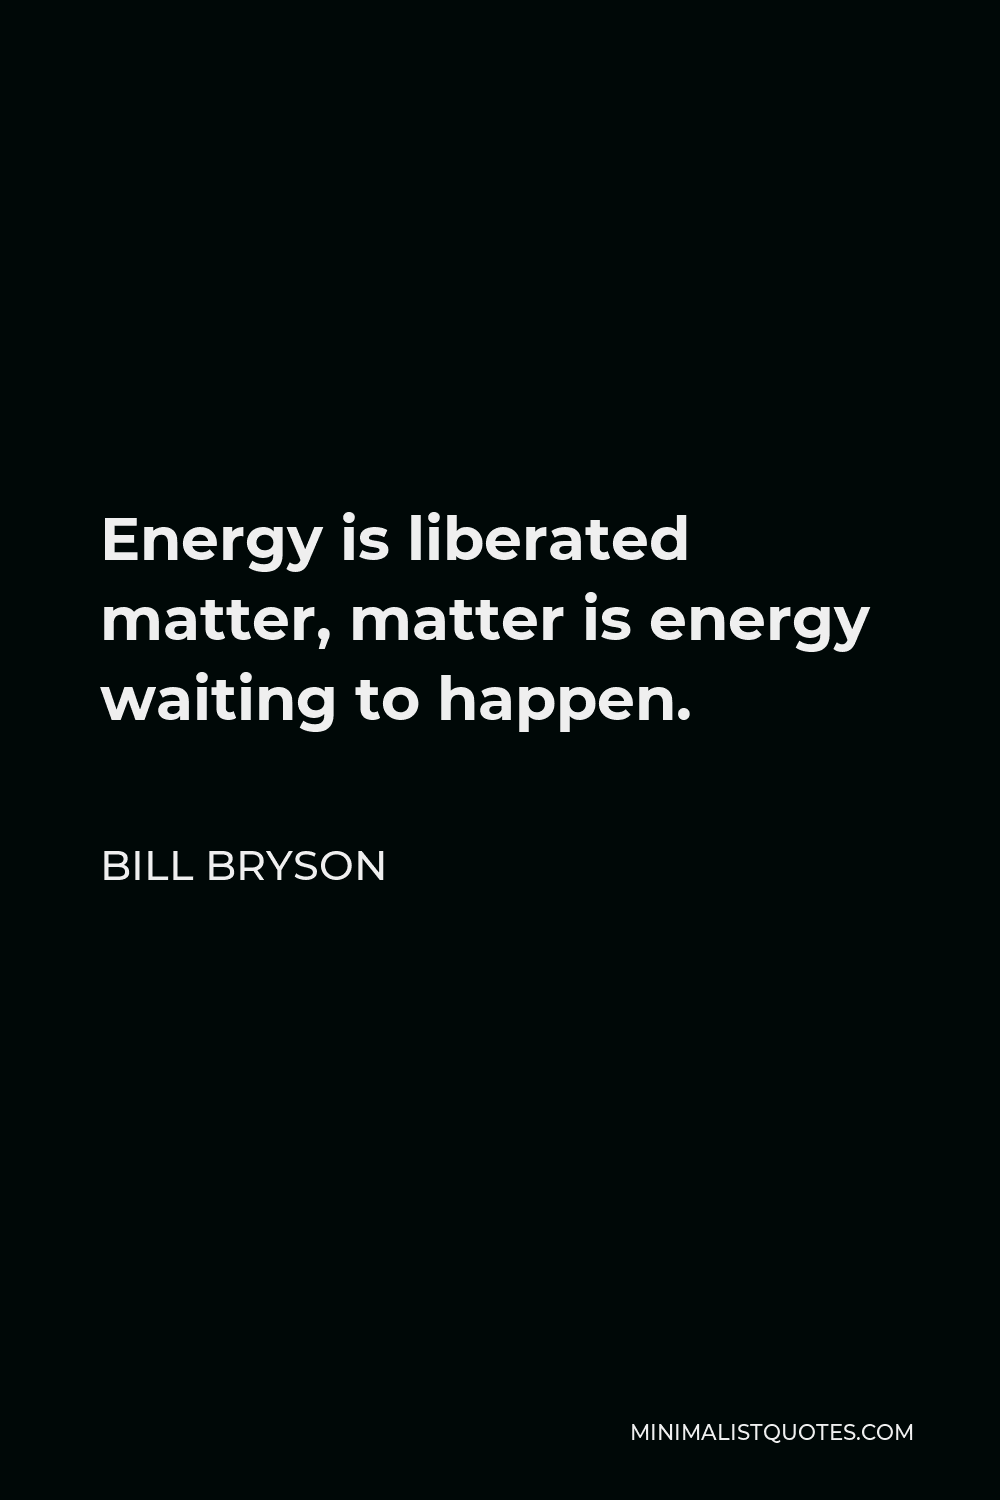 Bill Bryson Quote - Energy is liberated matter, matter is energy waiting to happen.